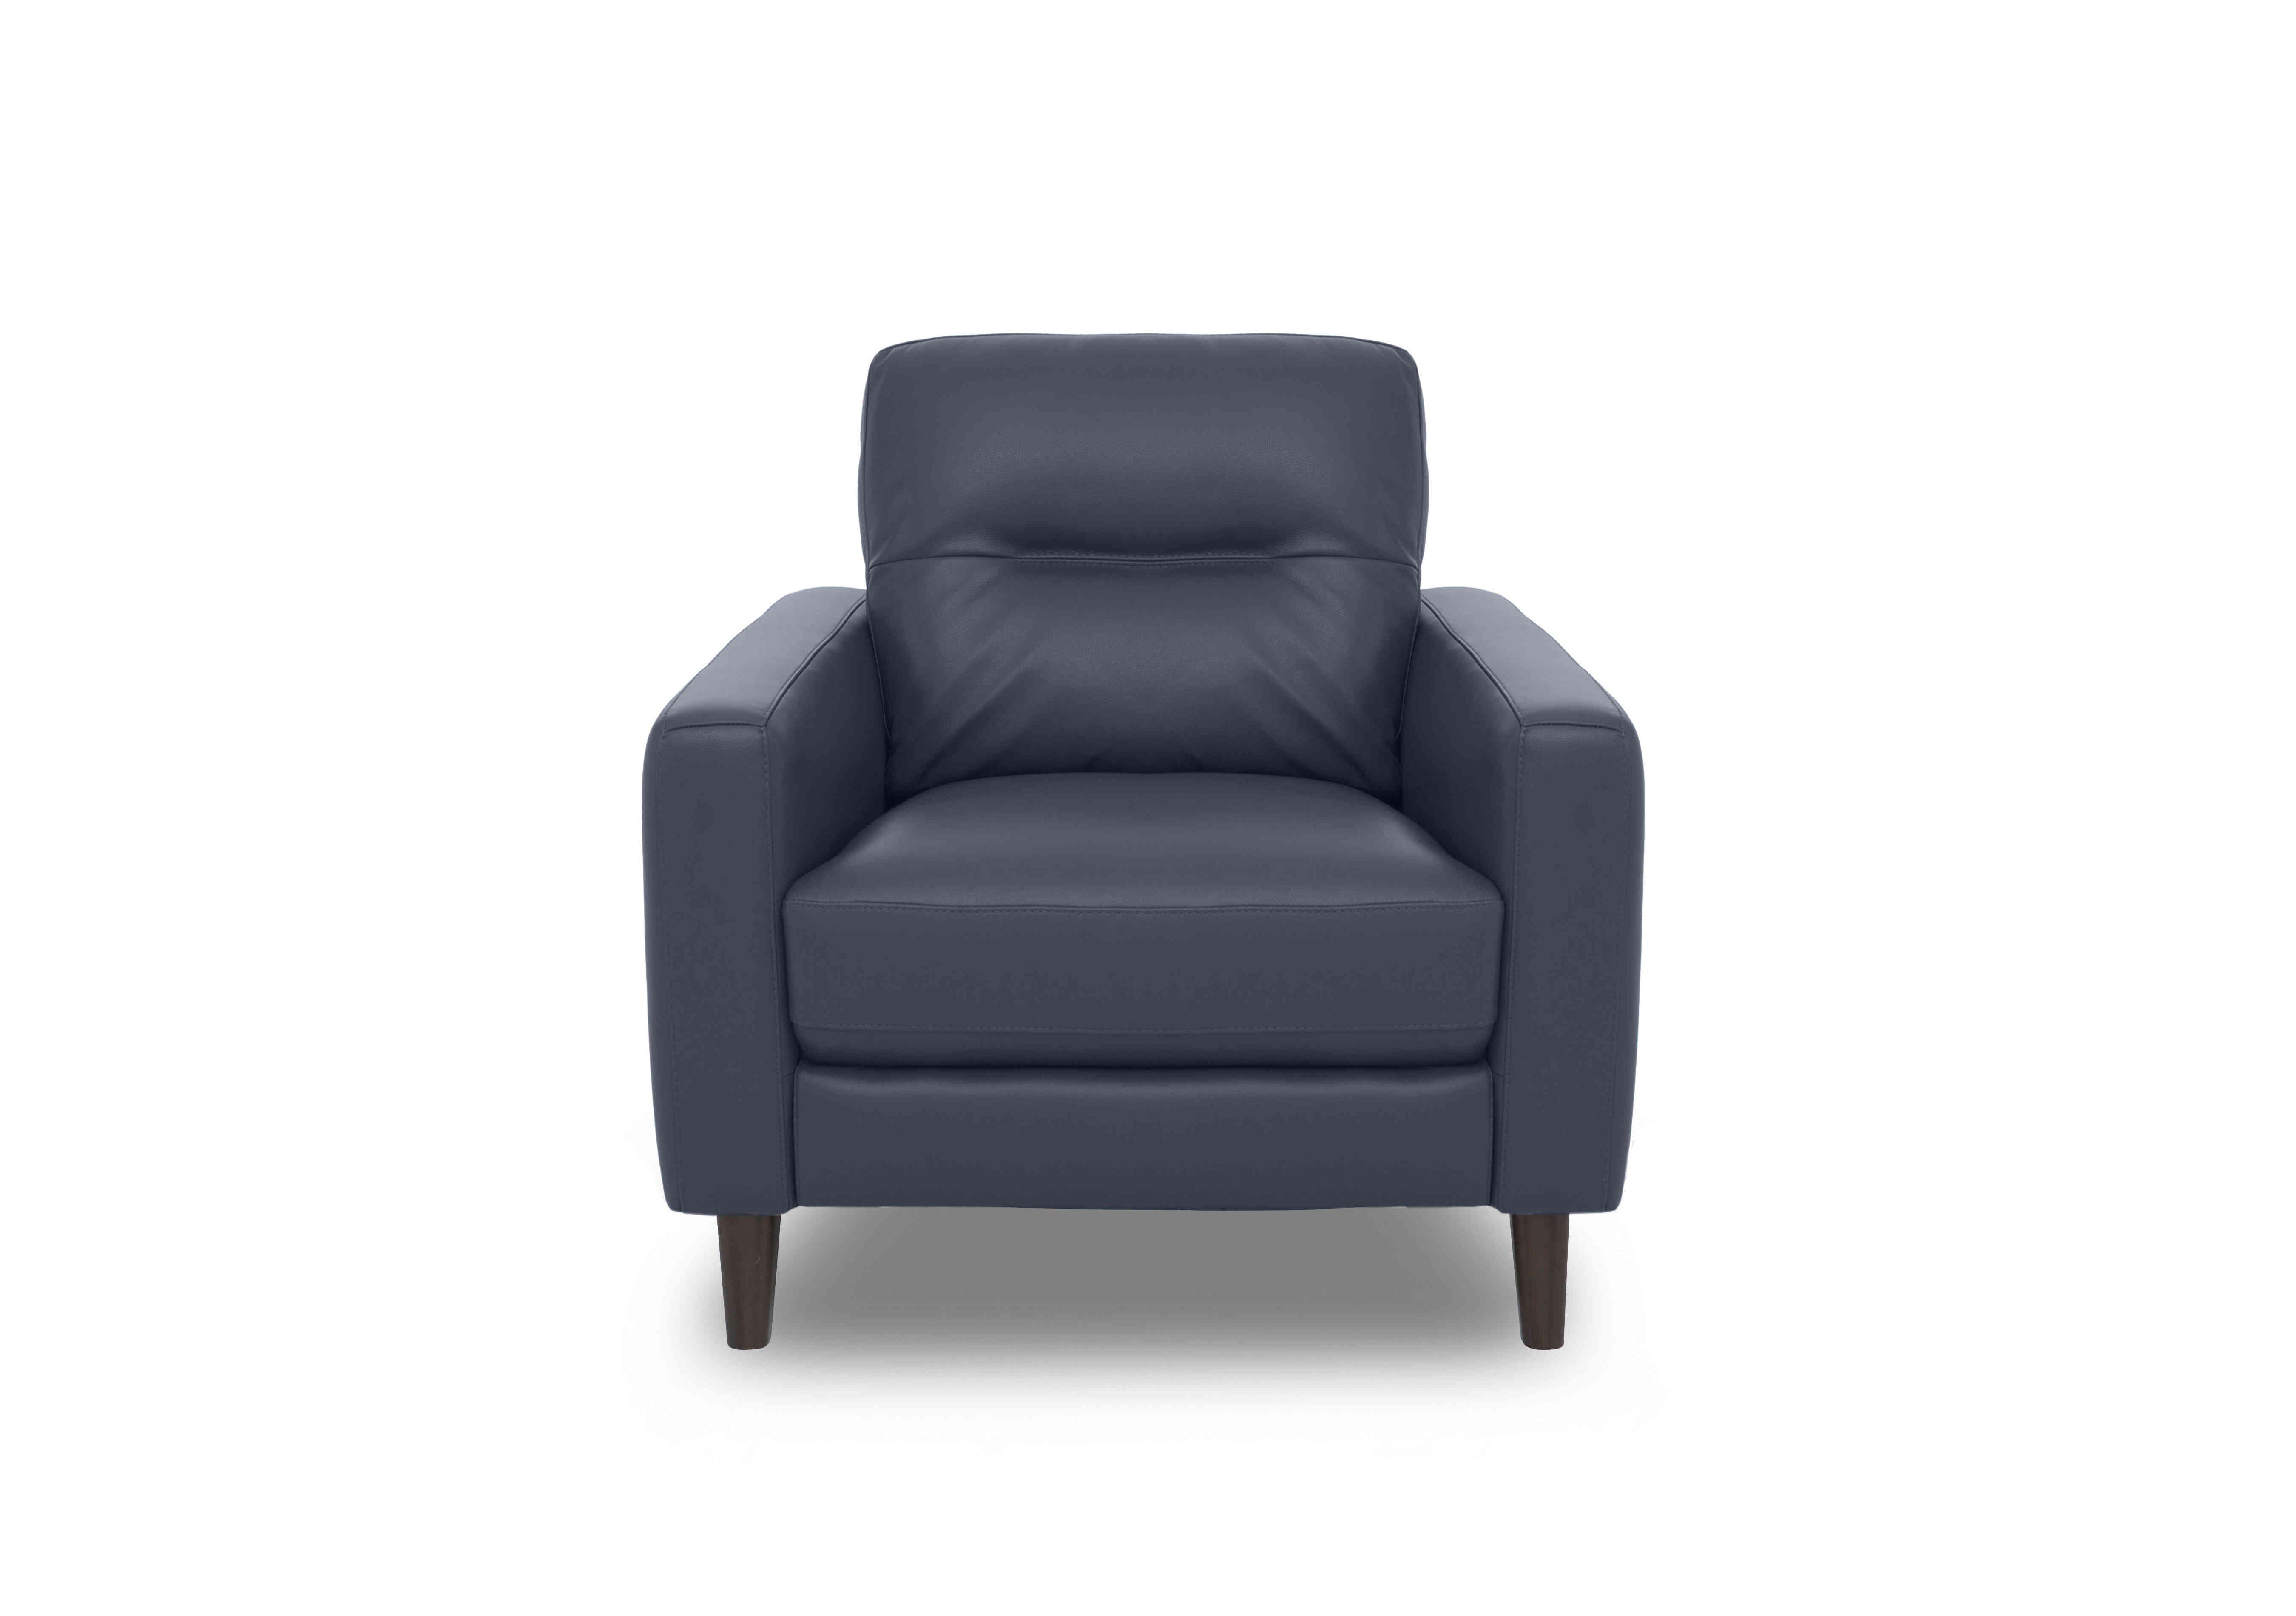 Jules Leather Chair in Bv-313e Ocean Blue on Furniture Village